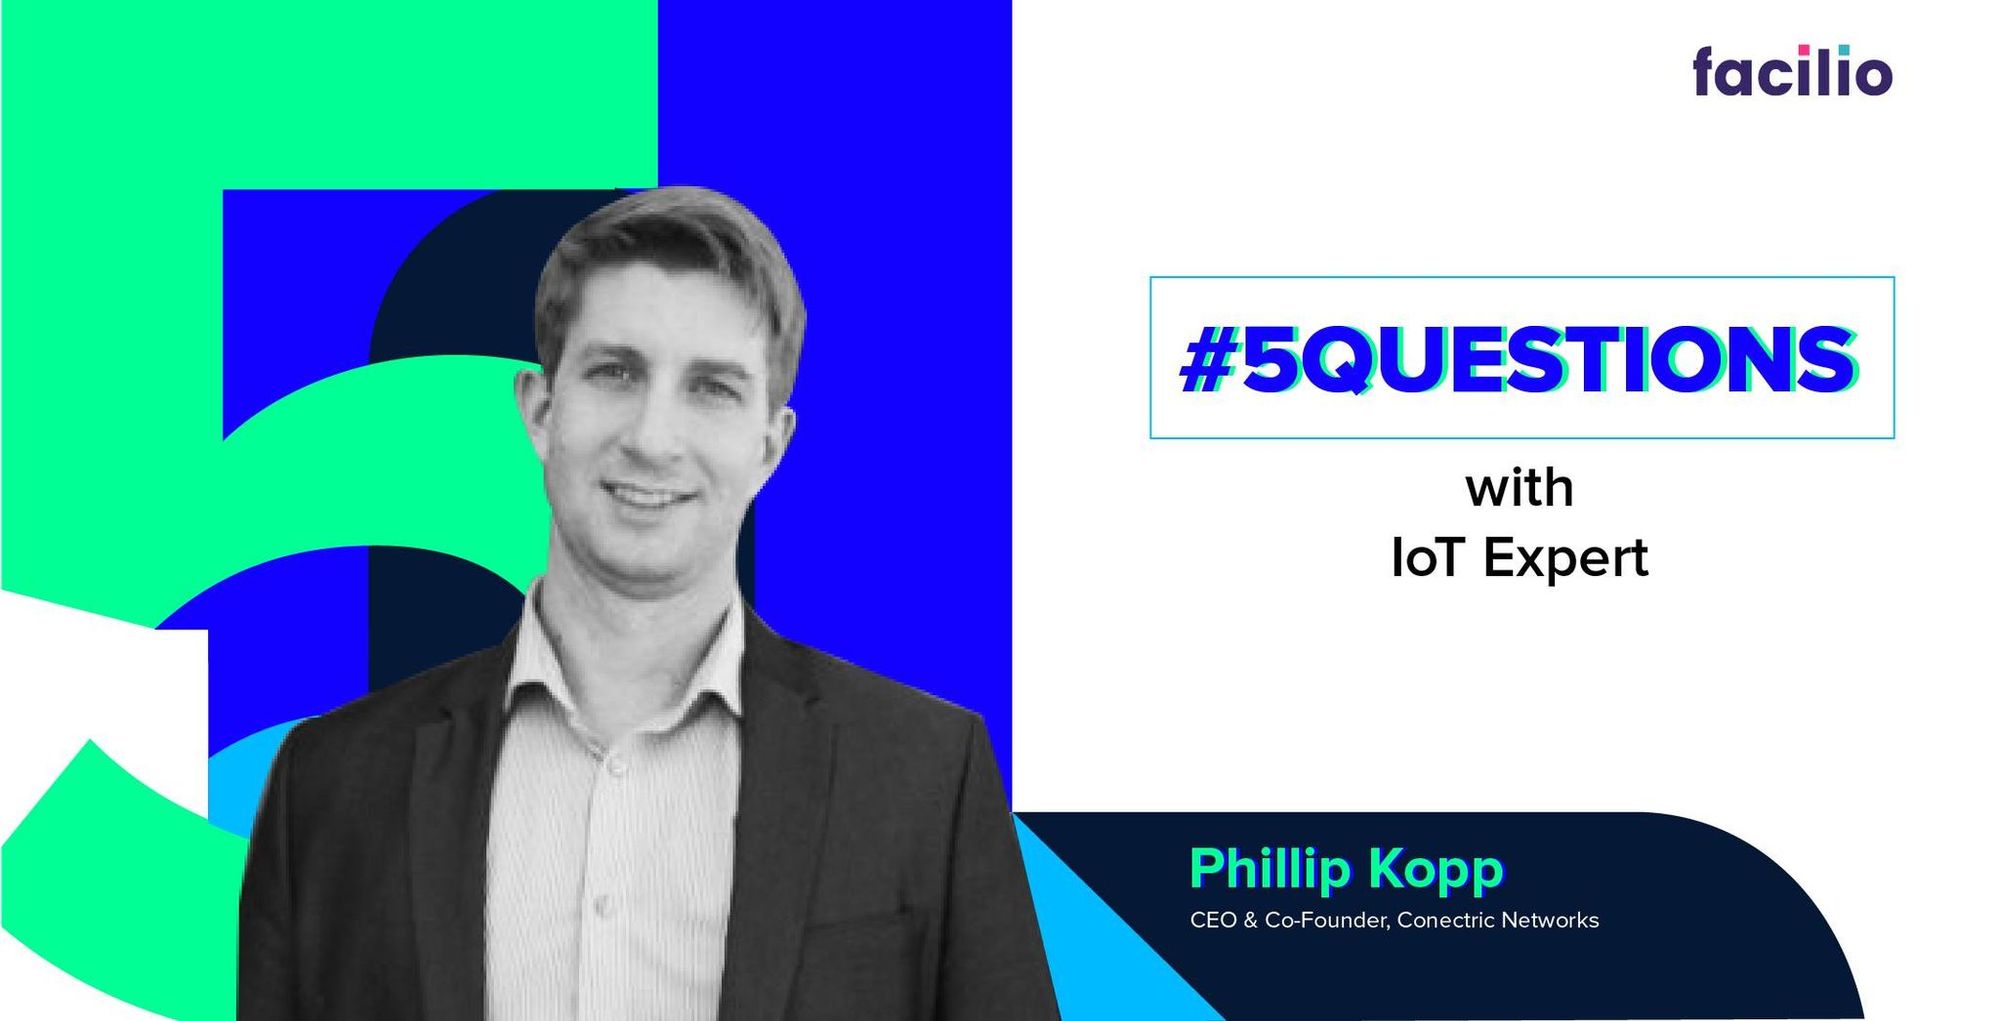 #5Questionswith an IoT Expert